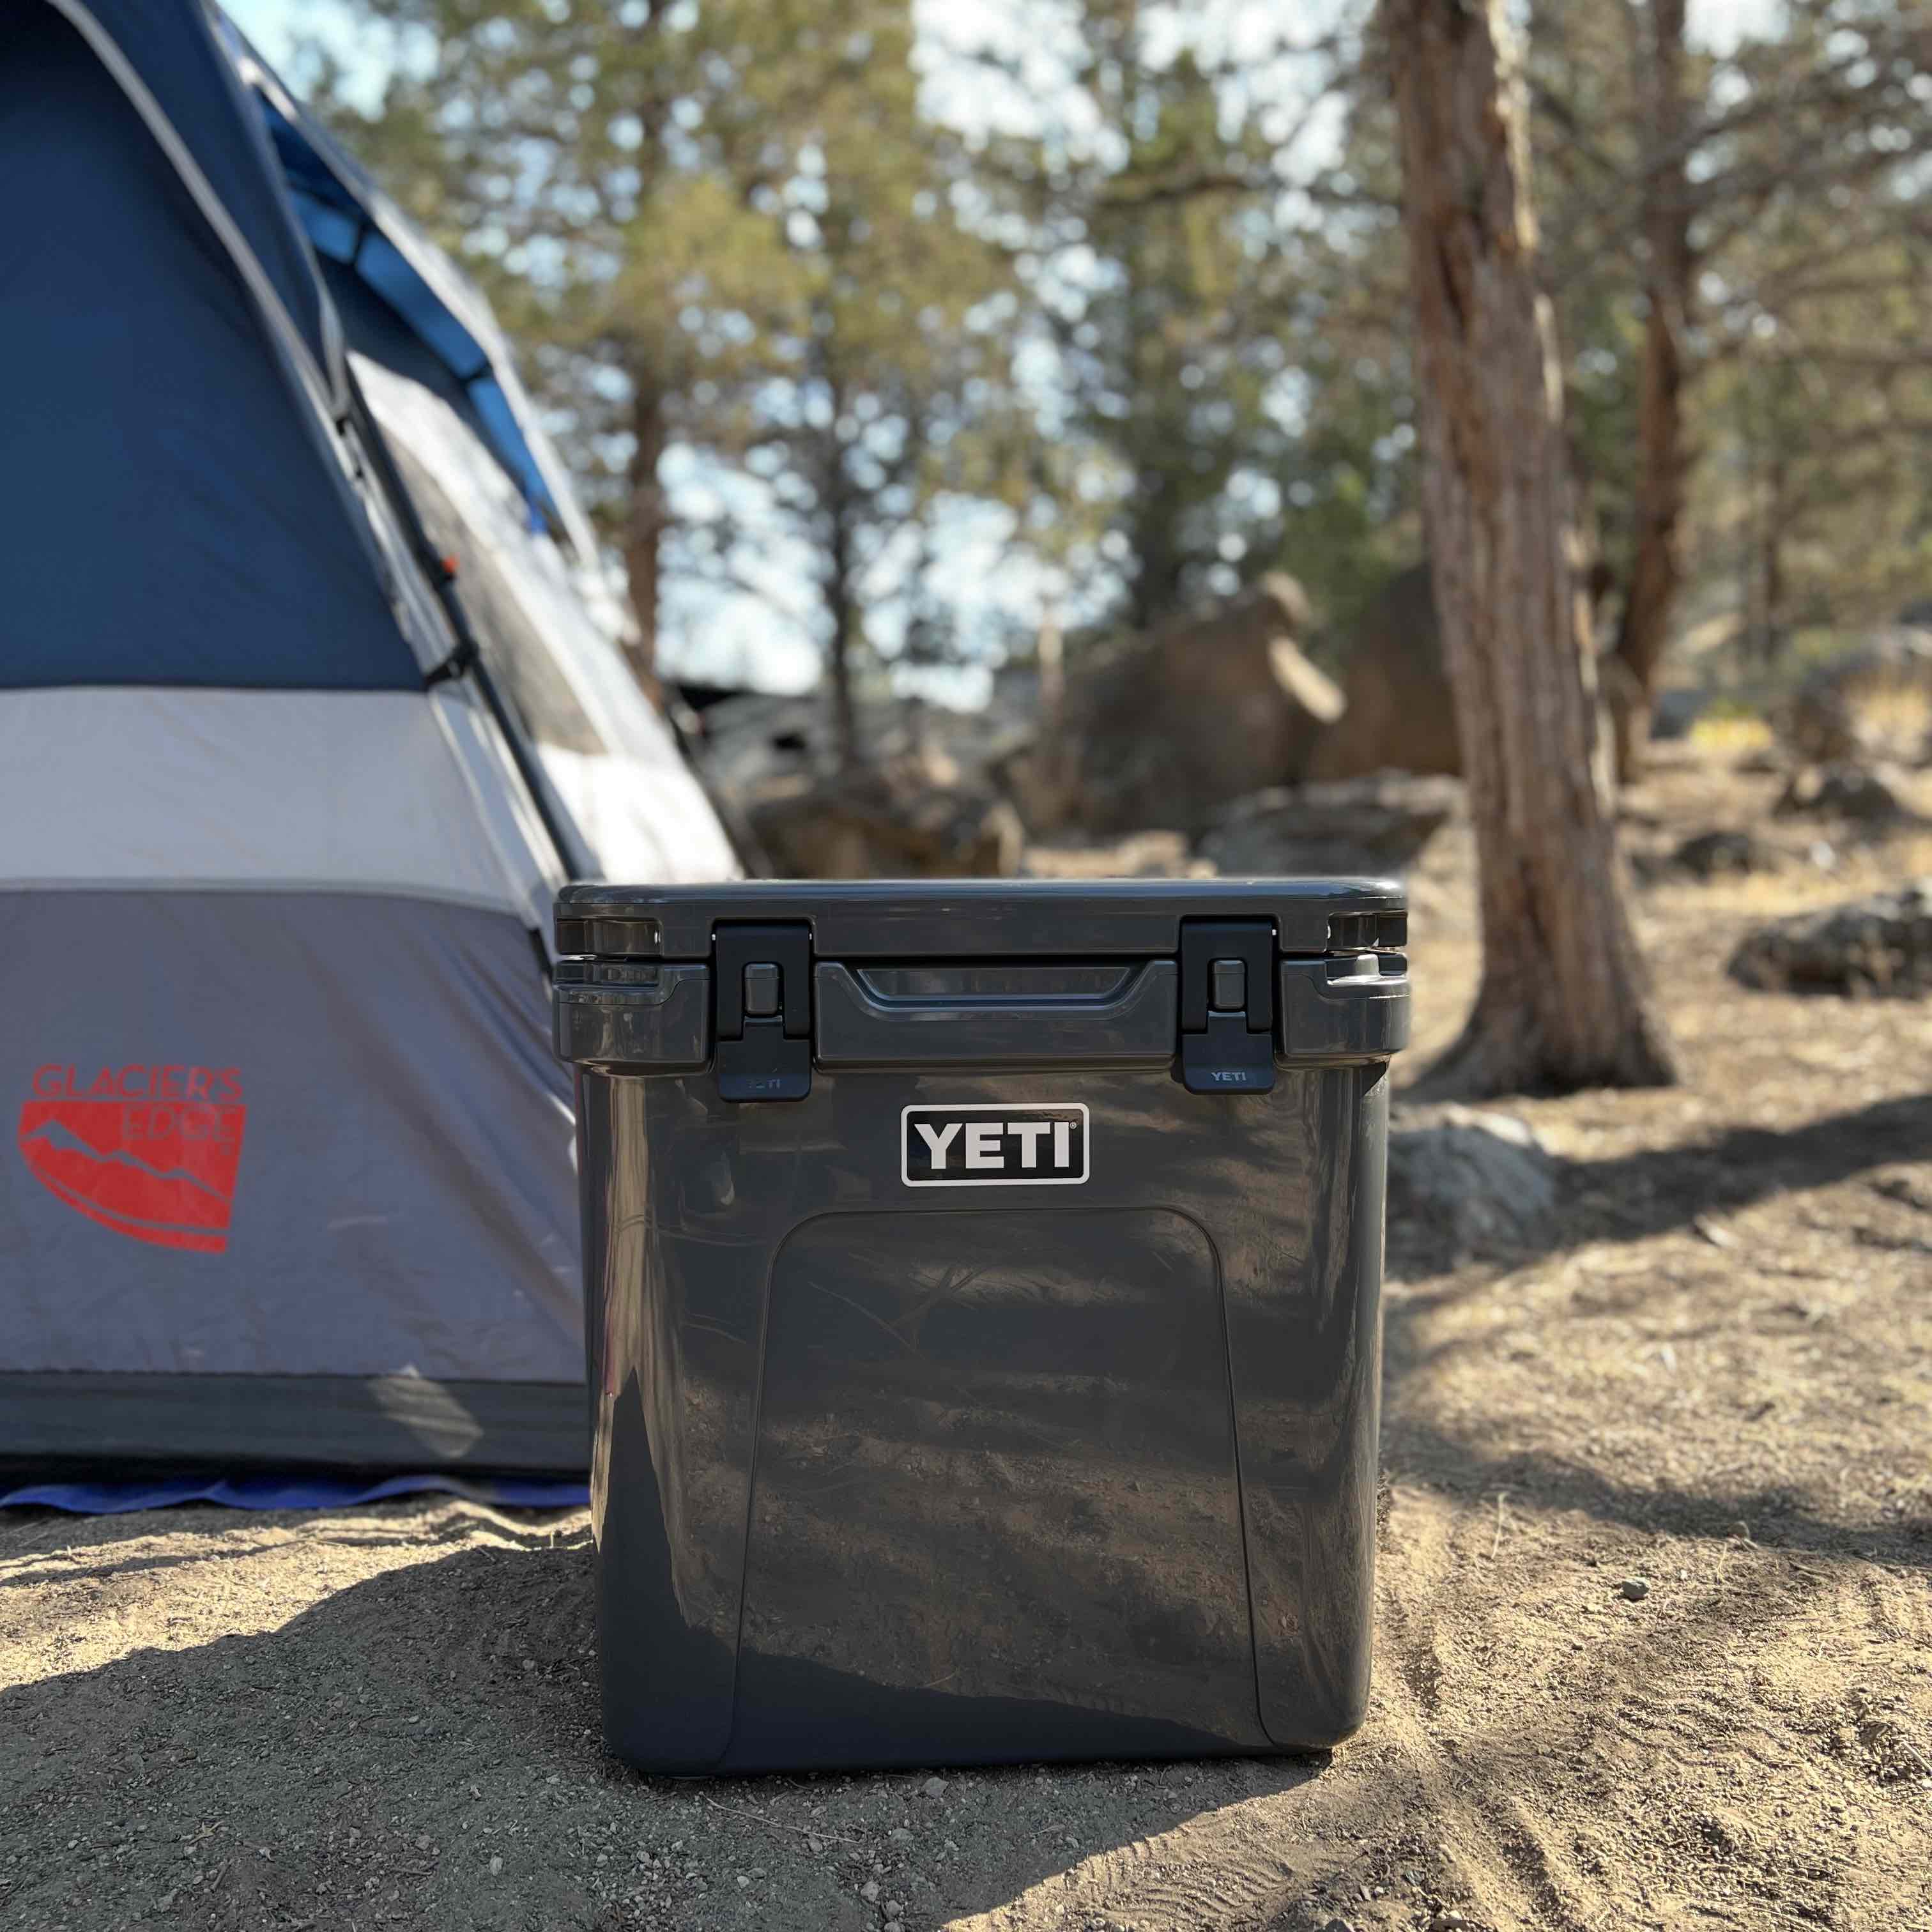 https://brewpublic.com/wp-content/uploads/2023/06/The-Roadie-48-Wheeled-Cooler-from-YETI-is-perfect-for-any-outdoor-activity..jpeg